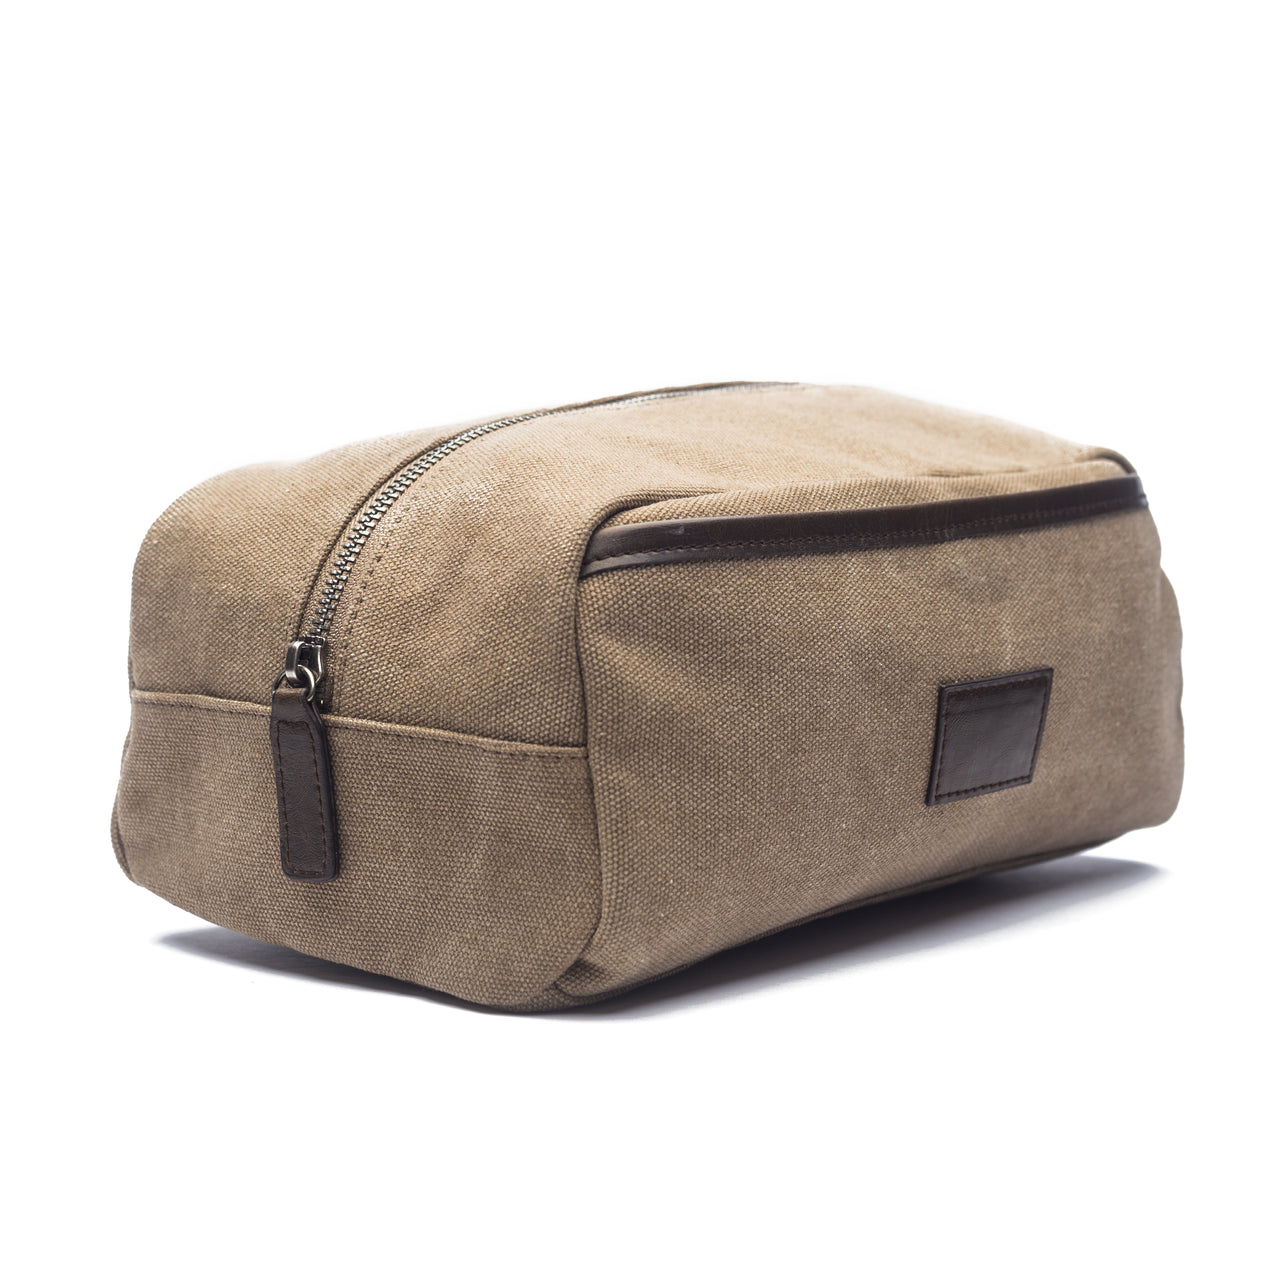 side view of khaki canvas zipper bag with vegan leather accents.